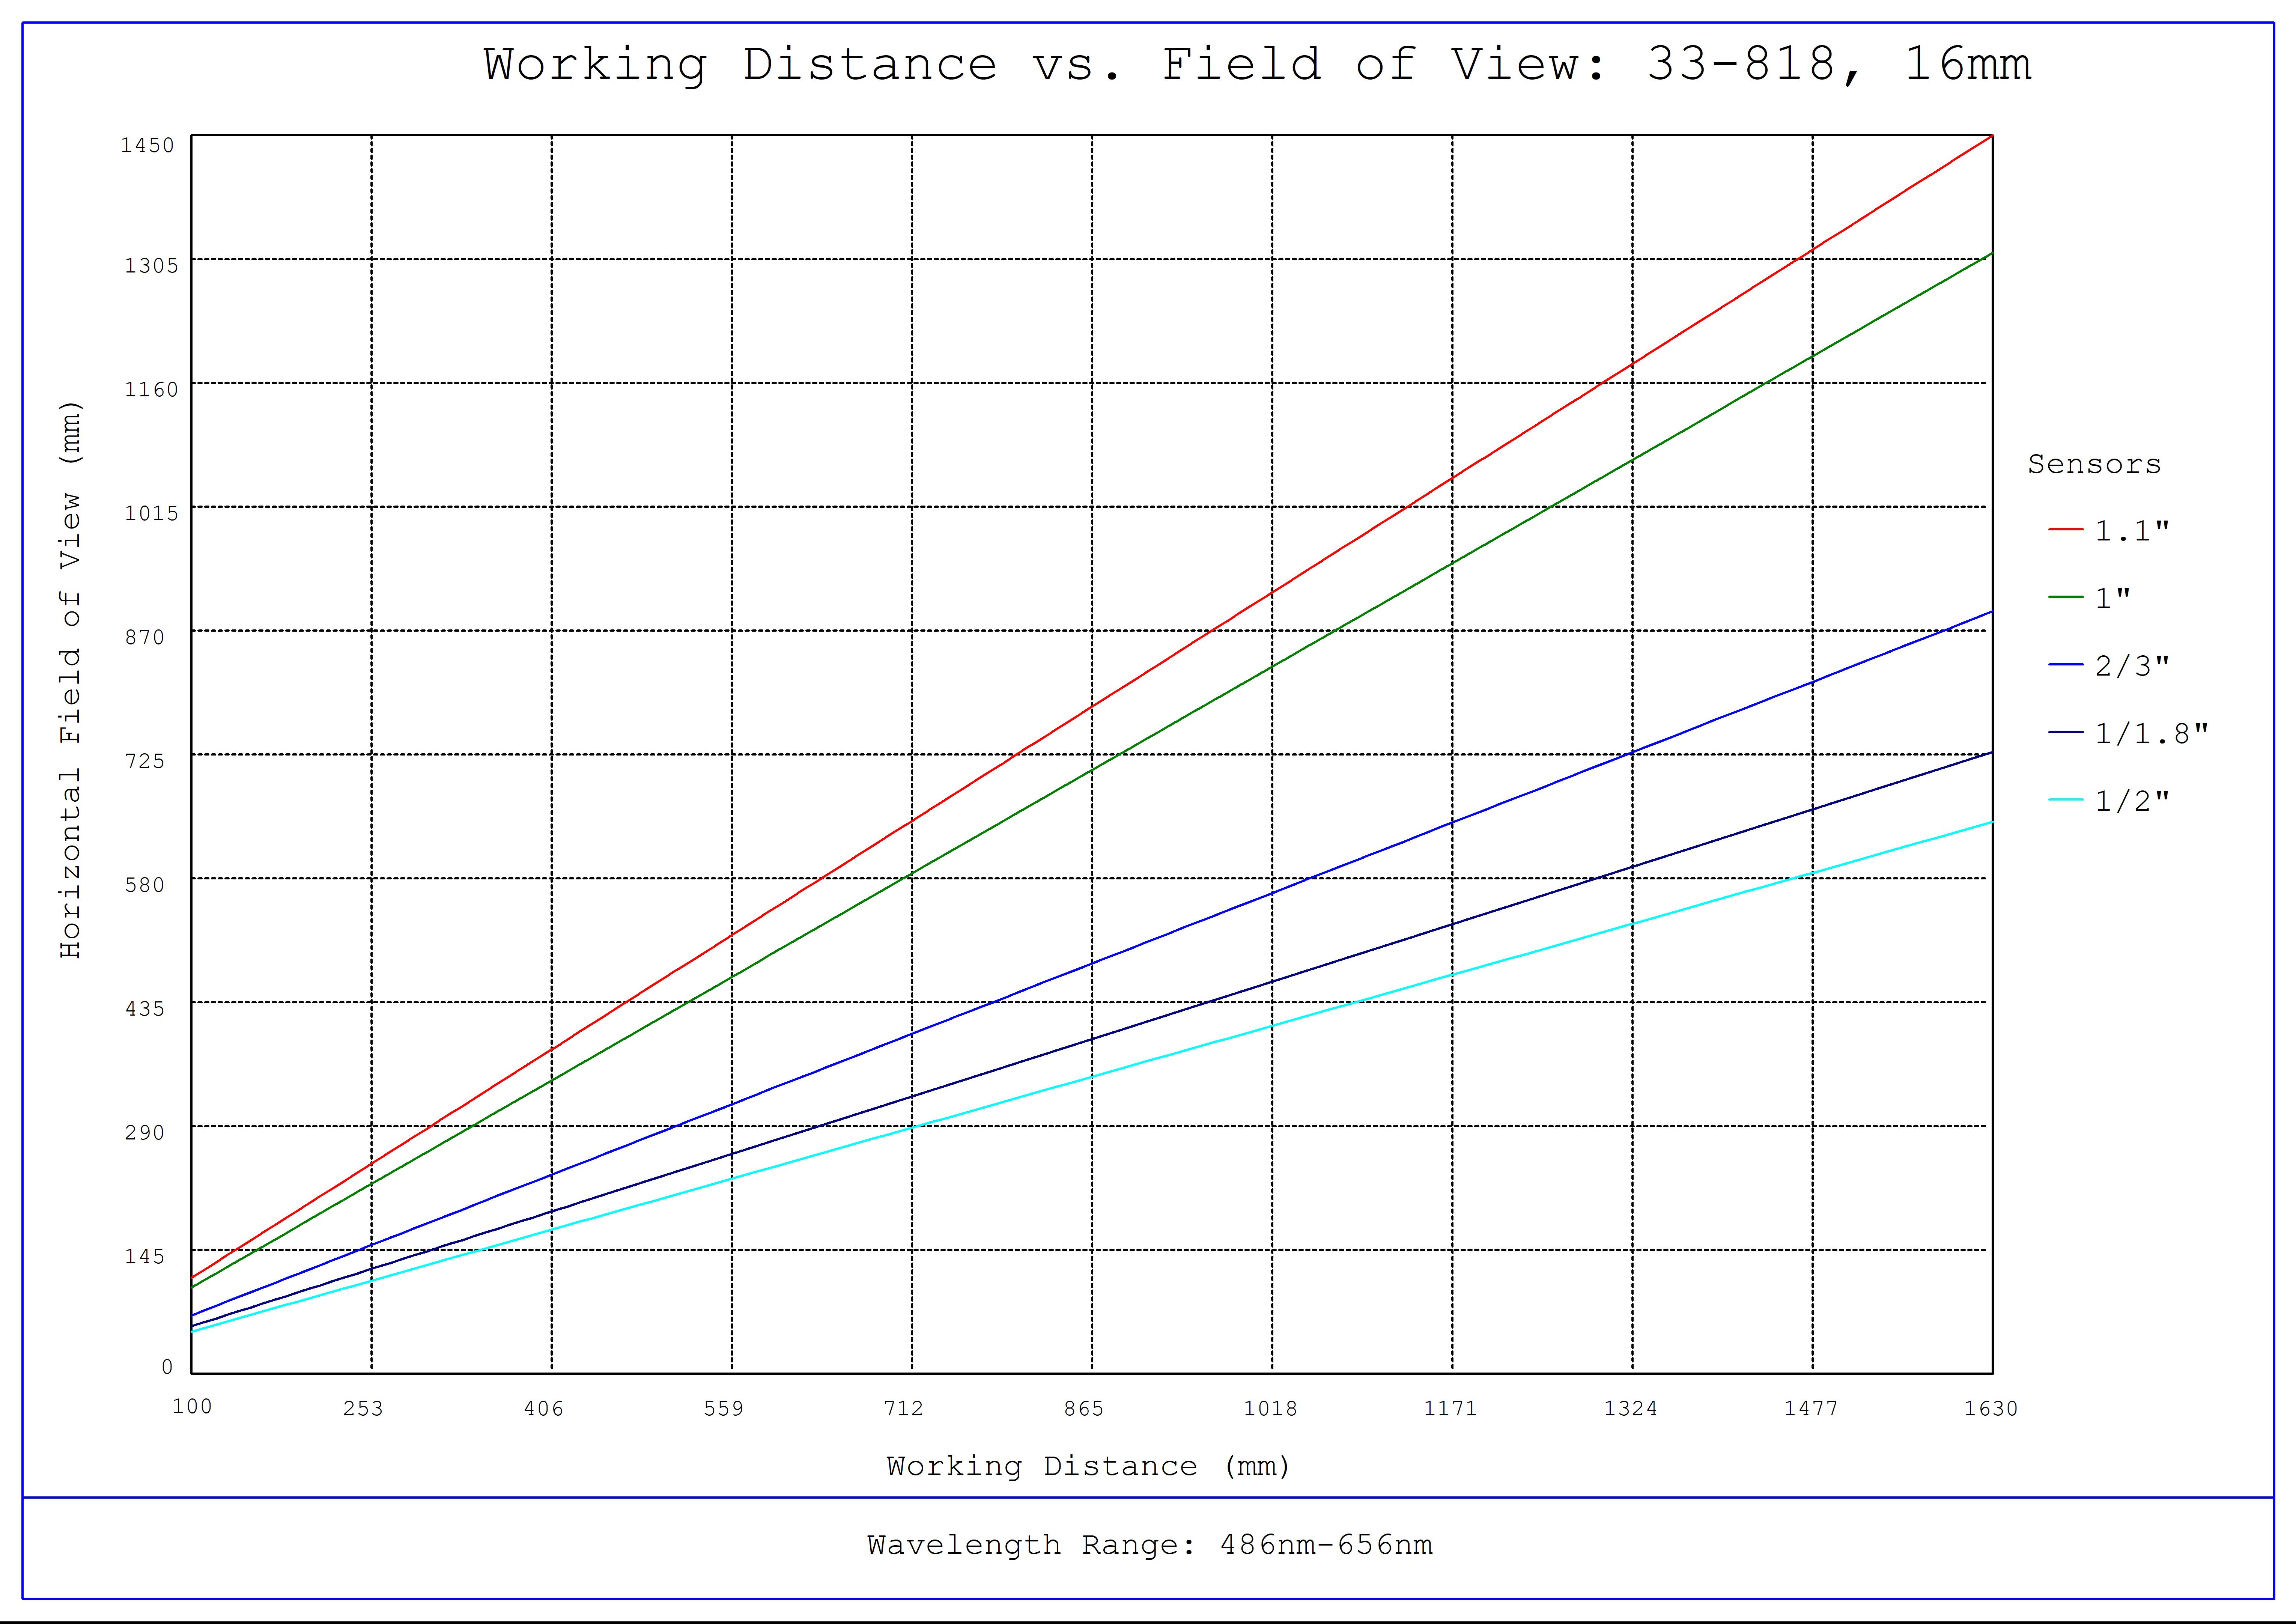 #33-818, 16mm f/8, HPi Series Fixed Focal Length Lens, Working Distance versus Field of View Plot